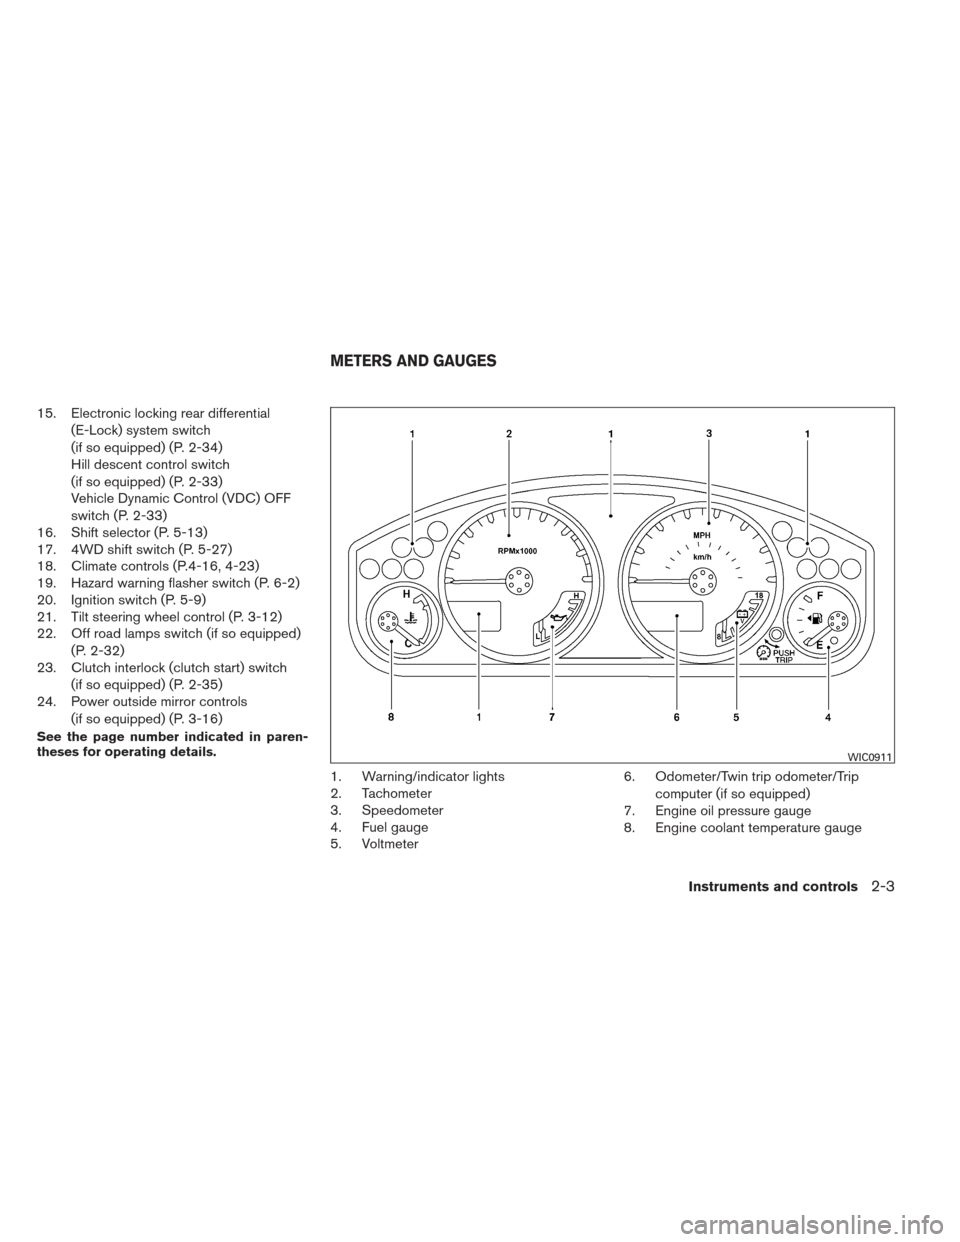 NISSAN XTERRA 2013 N50 / 2.G Manual PDF 15. Electronic locking rear differential(E-Lock) system switch
(if so equipped) (P. 2-34)
Hill descent control switch
(if so equipped) (P. 2-33)
Vehicle Dynamic Control (VDC) OFF
switch (P. 2-33)
16. 